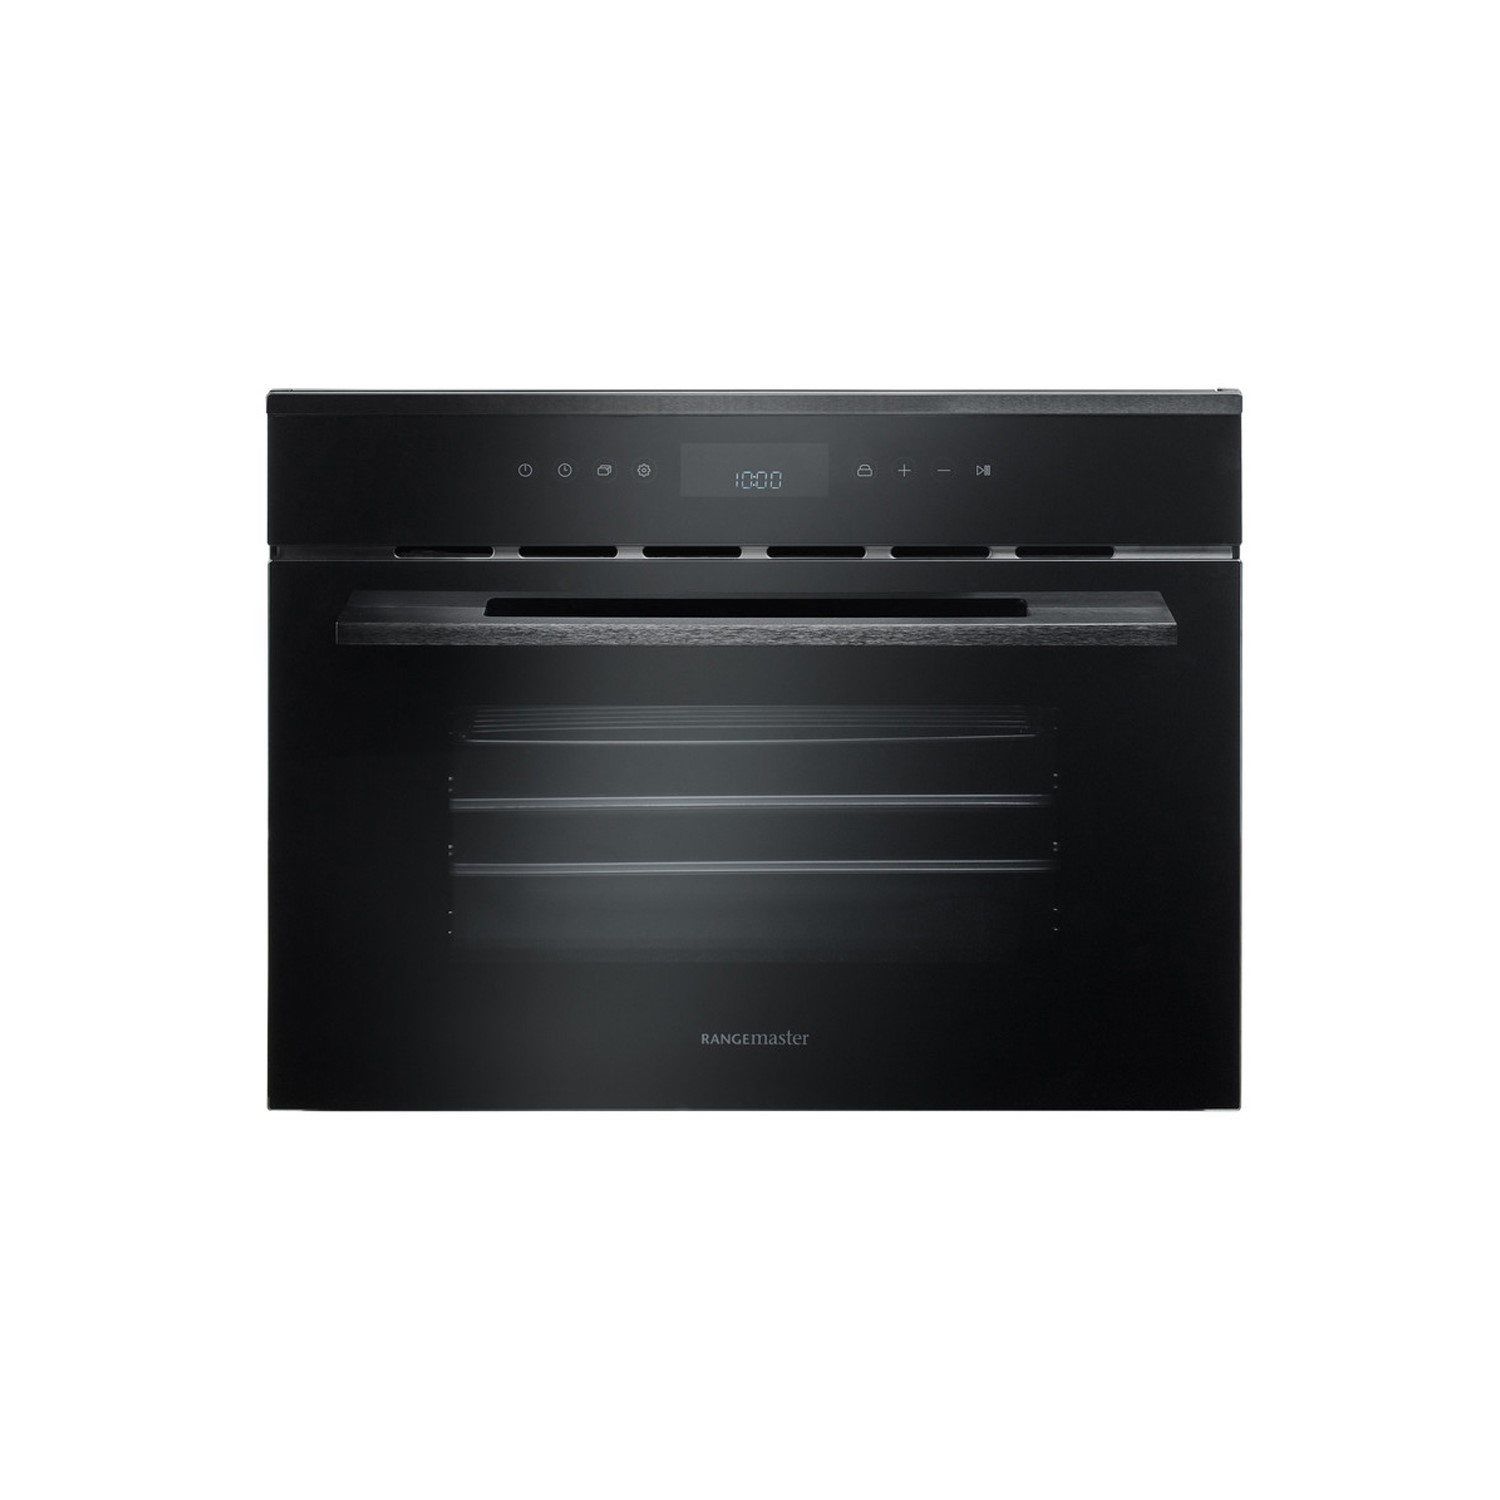 Refurbished Rangemaster ECL45SCBLBL 60cm Built-in Compact Steam Oven Black